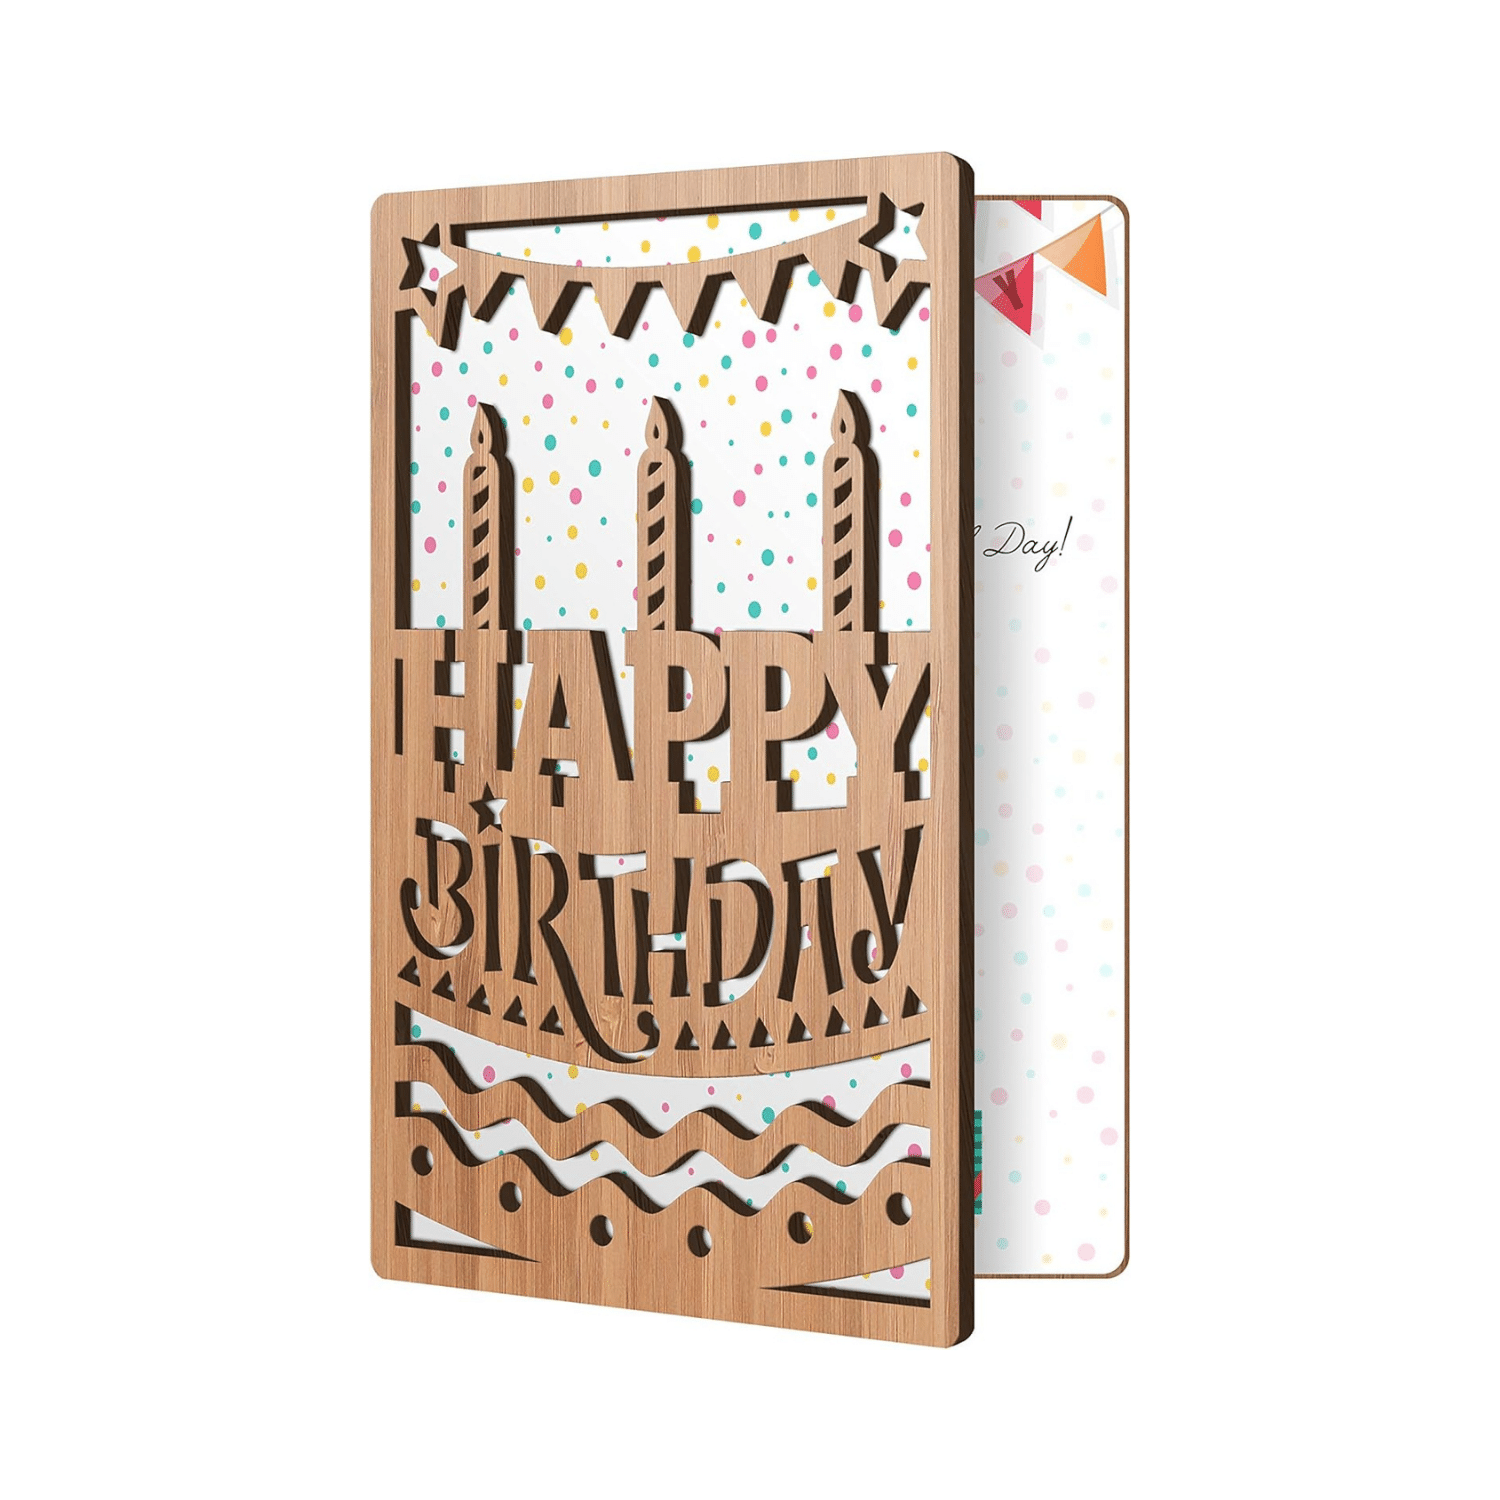 Handcrafted Bamboo Birthday Cards - Cake & Candles